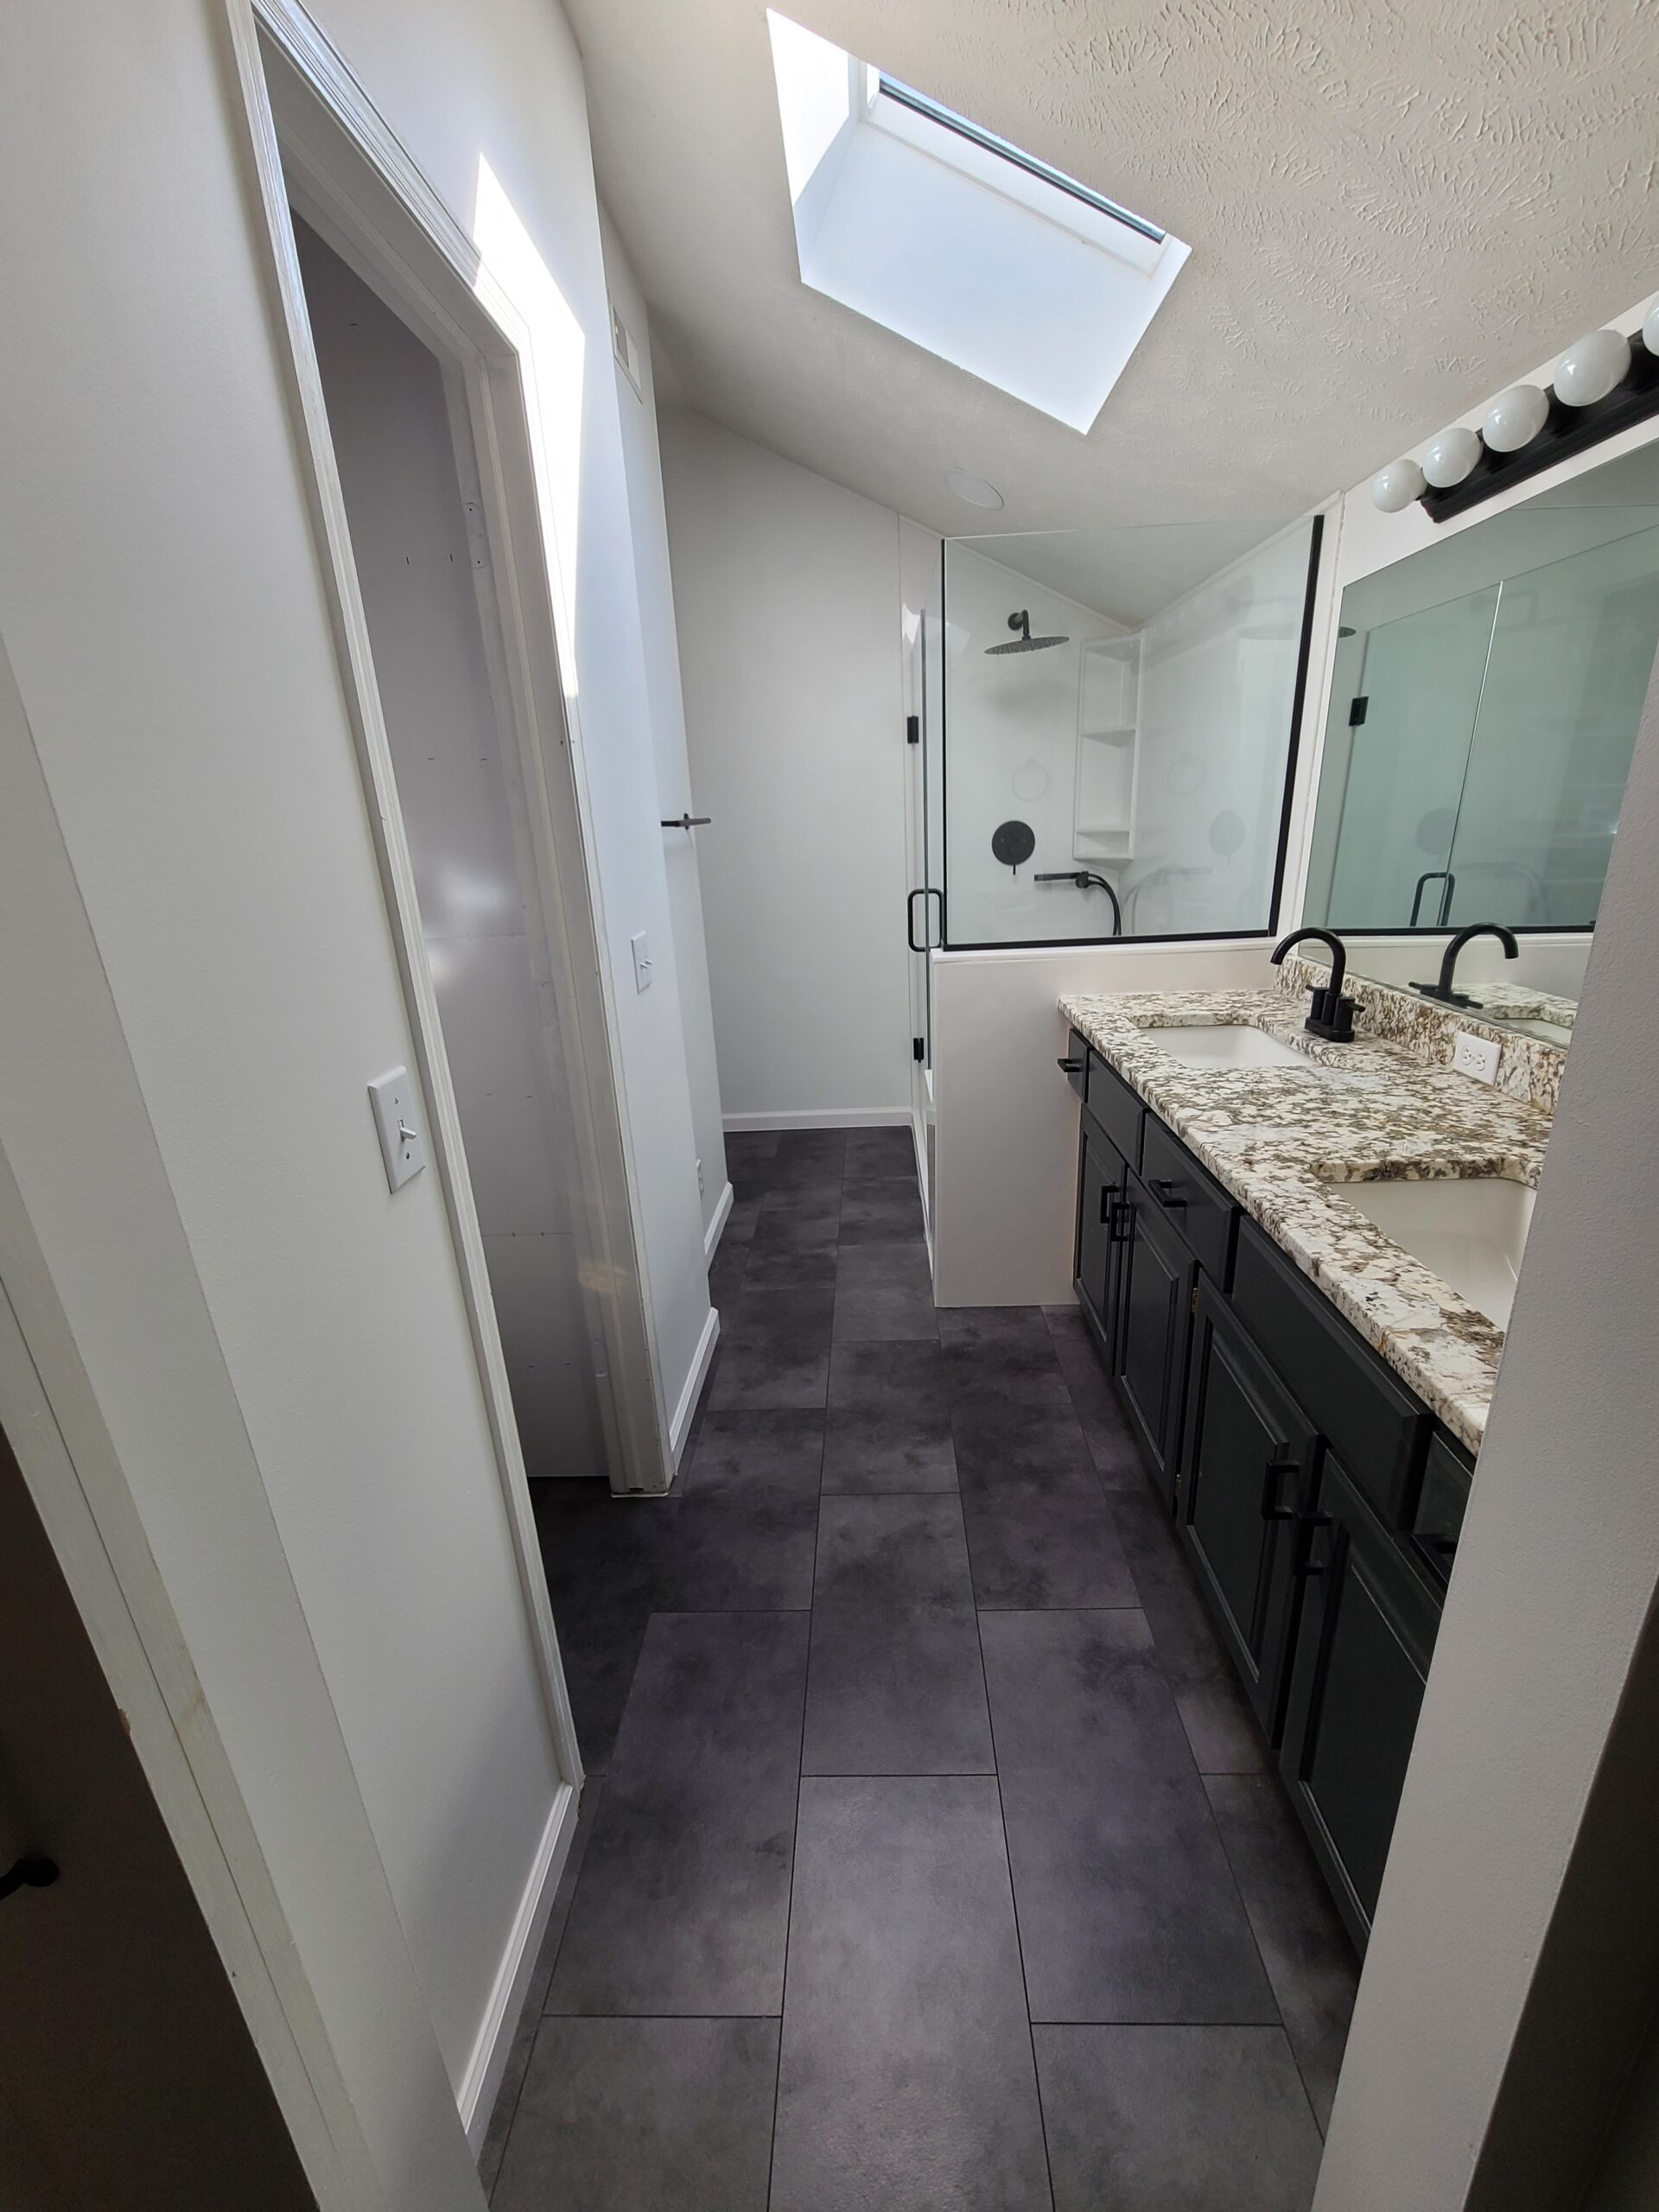 A bathroom remodel is completed by Houston Remodel Service. it includes a shower, two sinks, and even a skylight.